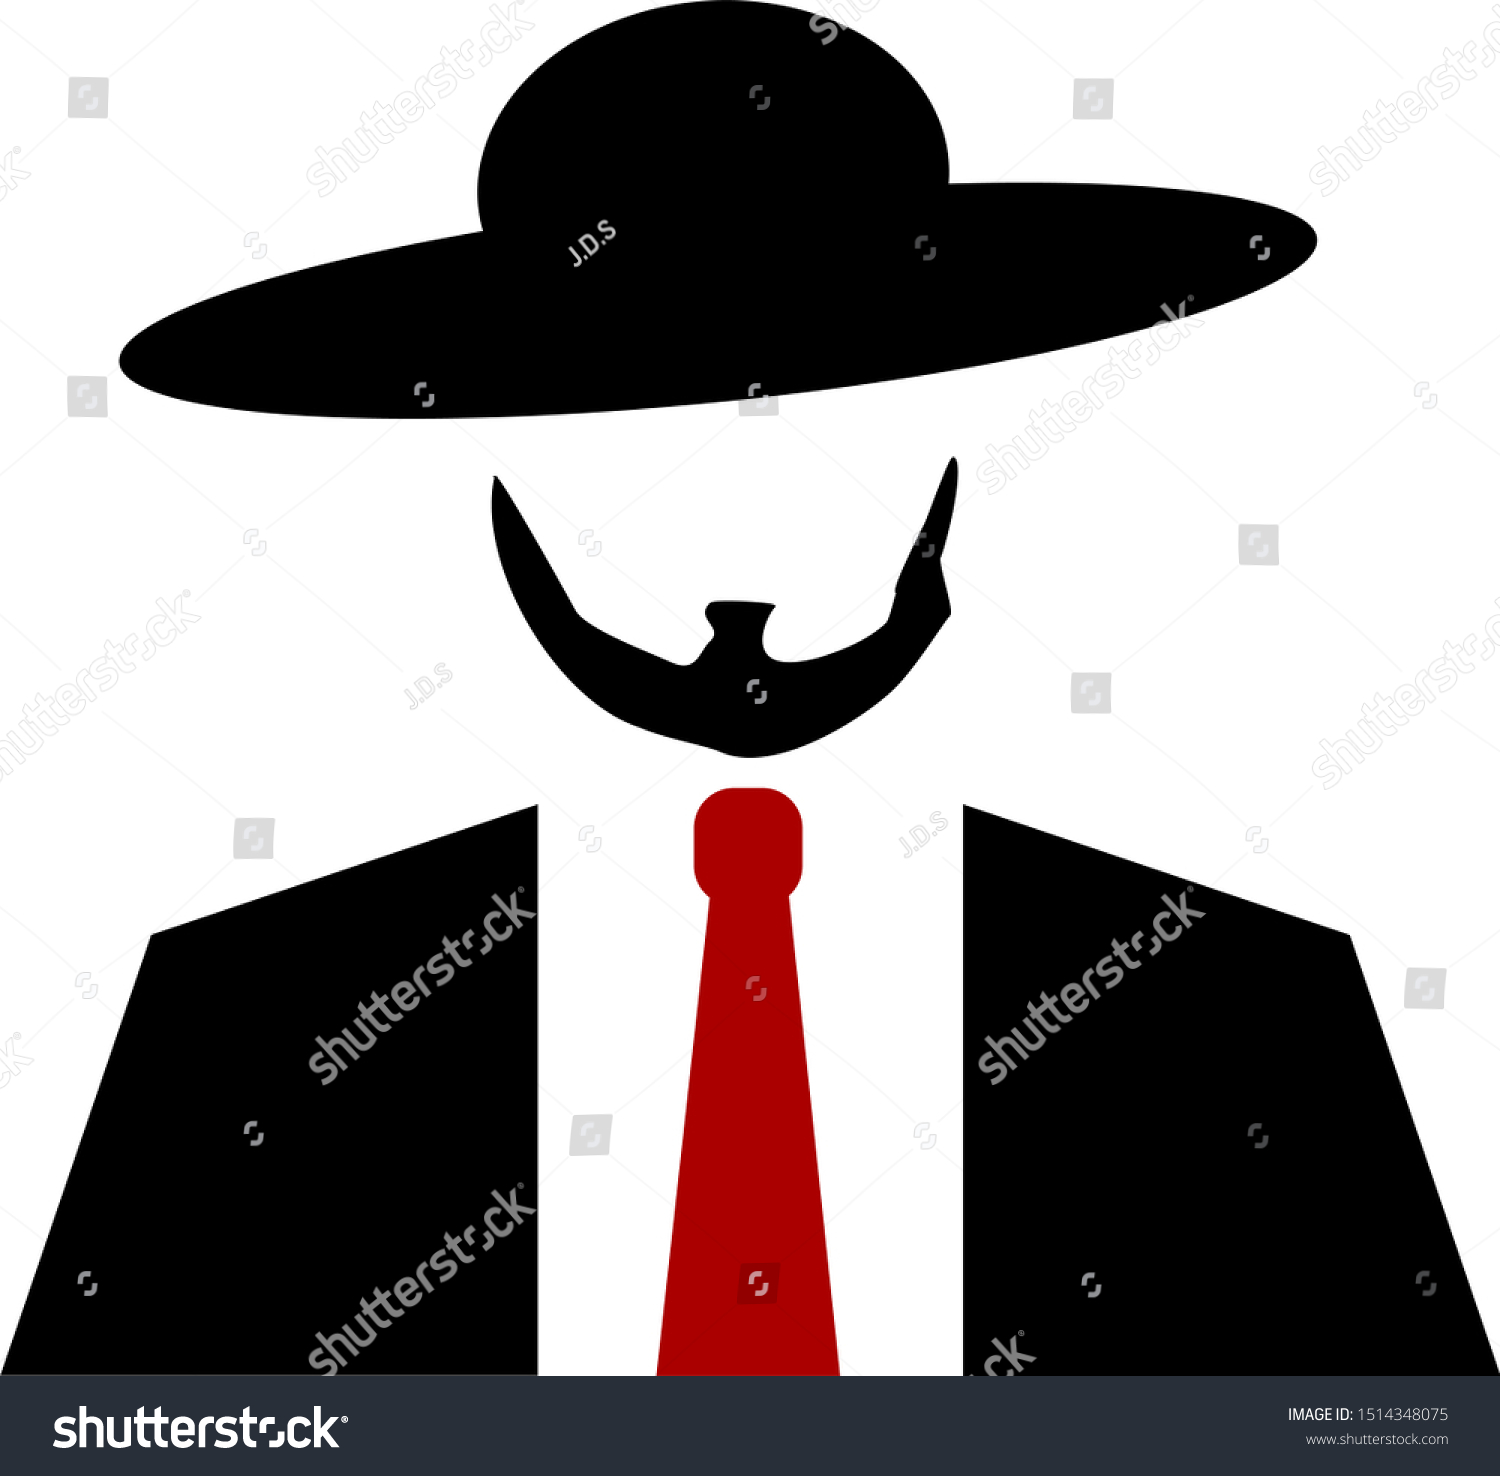 SVG of Amish man wearing suit and red tie svg